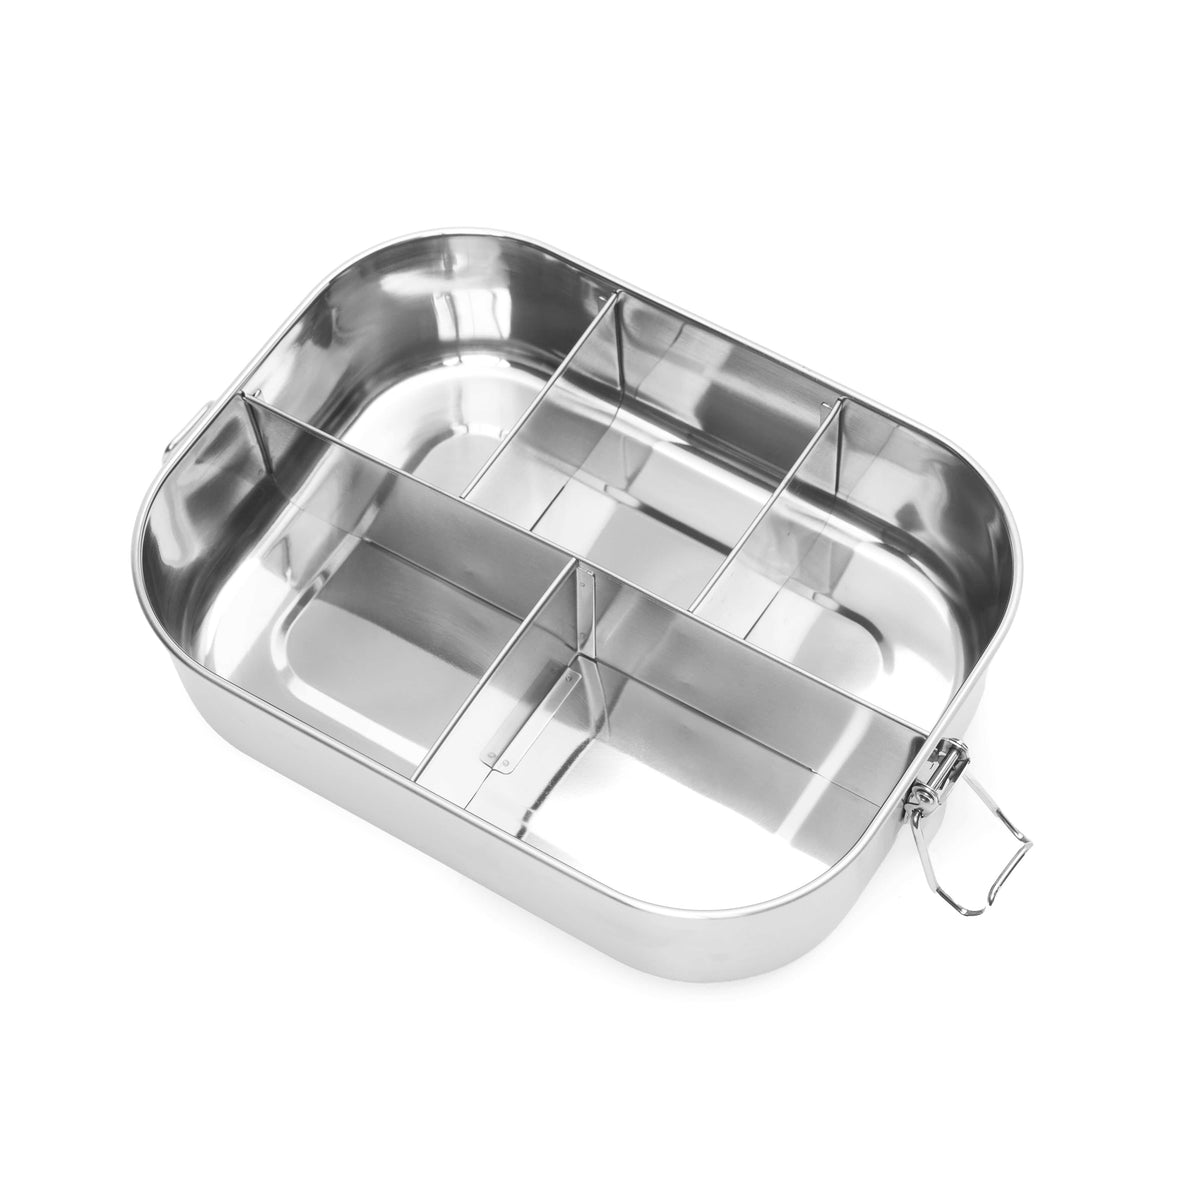 https://ethikainc.com/cdn/shop/files/ethika-inc-stainless-steel-divided-food-container-1400ml-with-3-way-compartments-44688978805002_1200x1600.jpg?v=1695148828